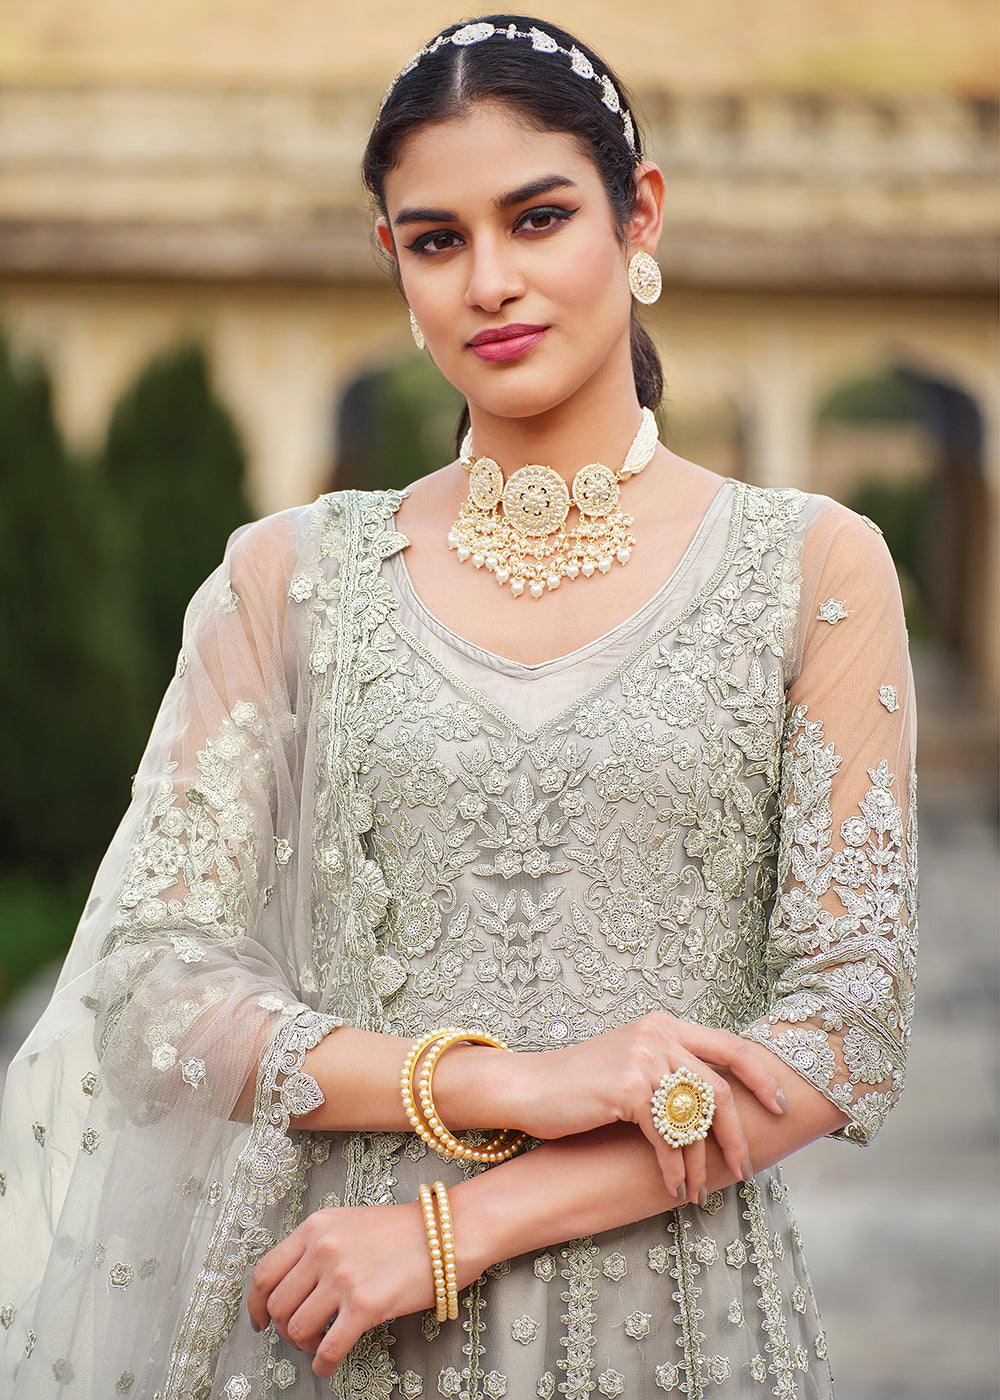 Buy Now Butterfly Net Grey Embroidered Wedding Bridesmaid Anarkali Suit Online in USA, UK, Australia, New Zealand, Canada, Italy & Worldwide at Empress Clothing. 